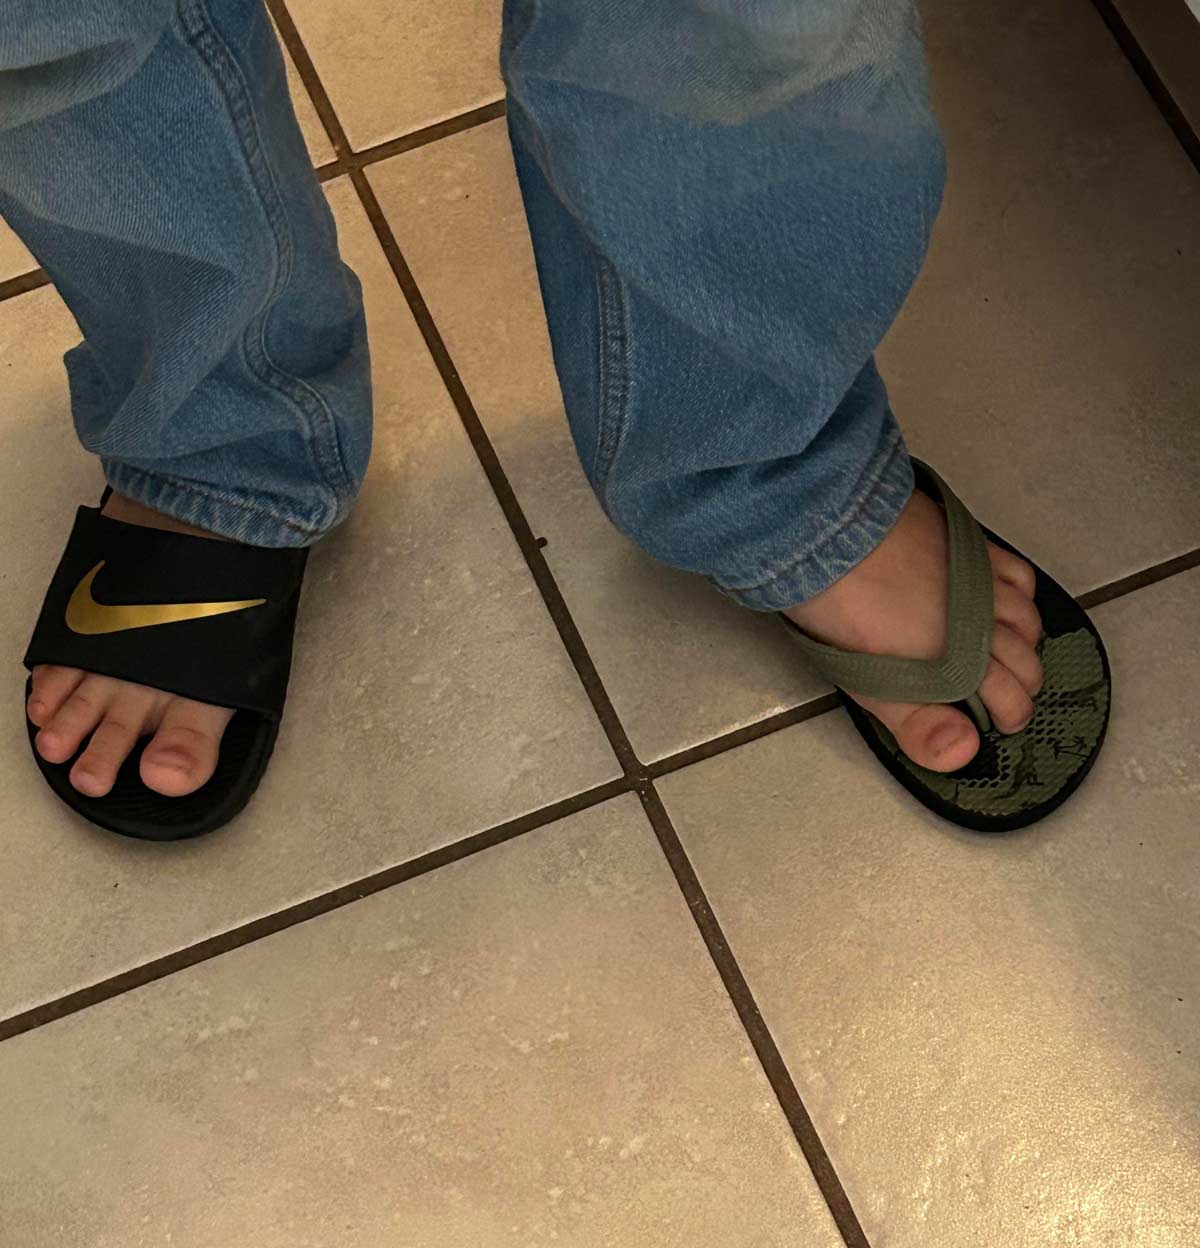 My 8-year-old is going to grandmas. I told him to dress nice and hurry up because he’s going to church with them. I didn’t see how he left the house... My mom just sent me this pic